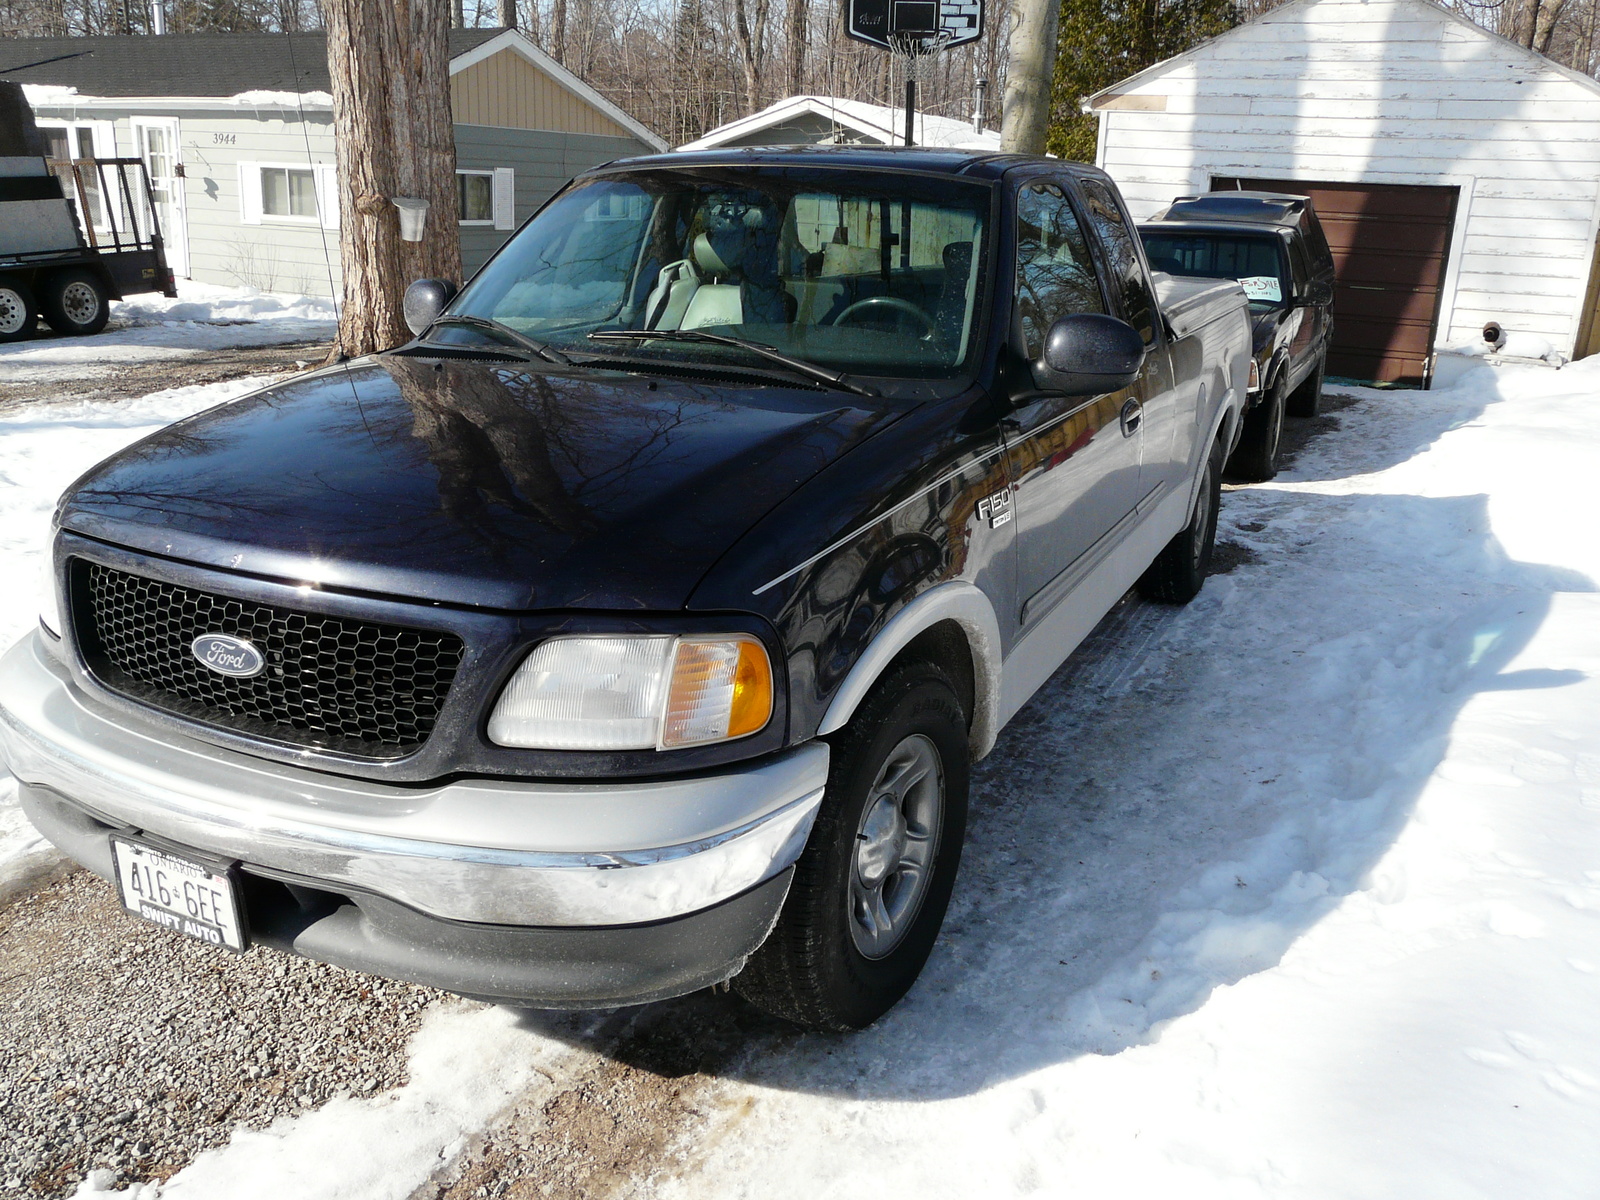 2001 Ford f150 extended cab reviews #1